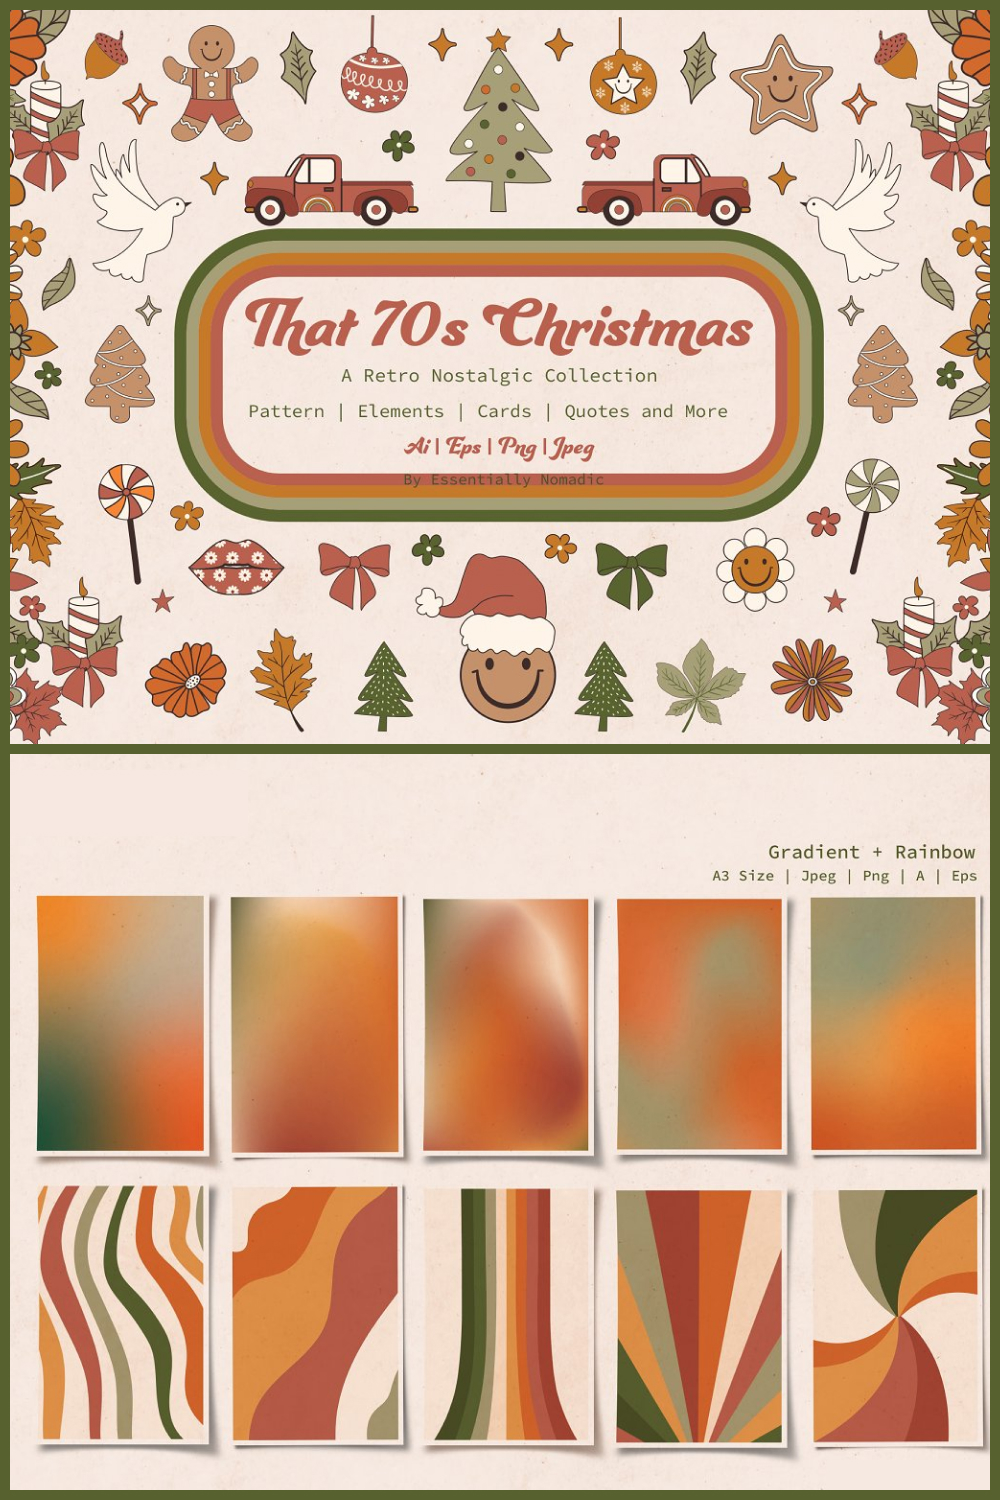 Retro christmas collection of pinterest.